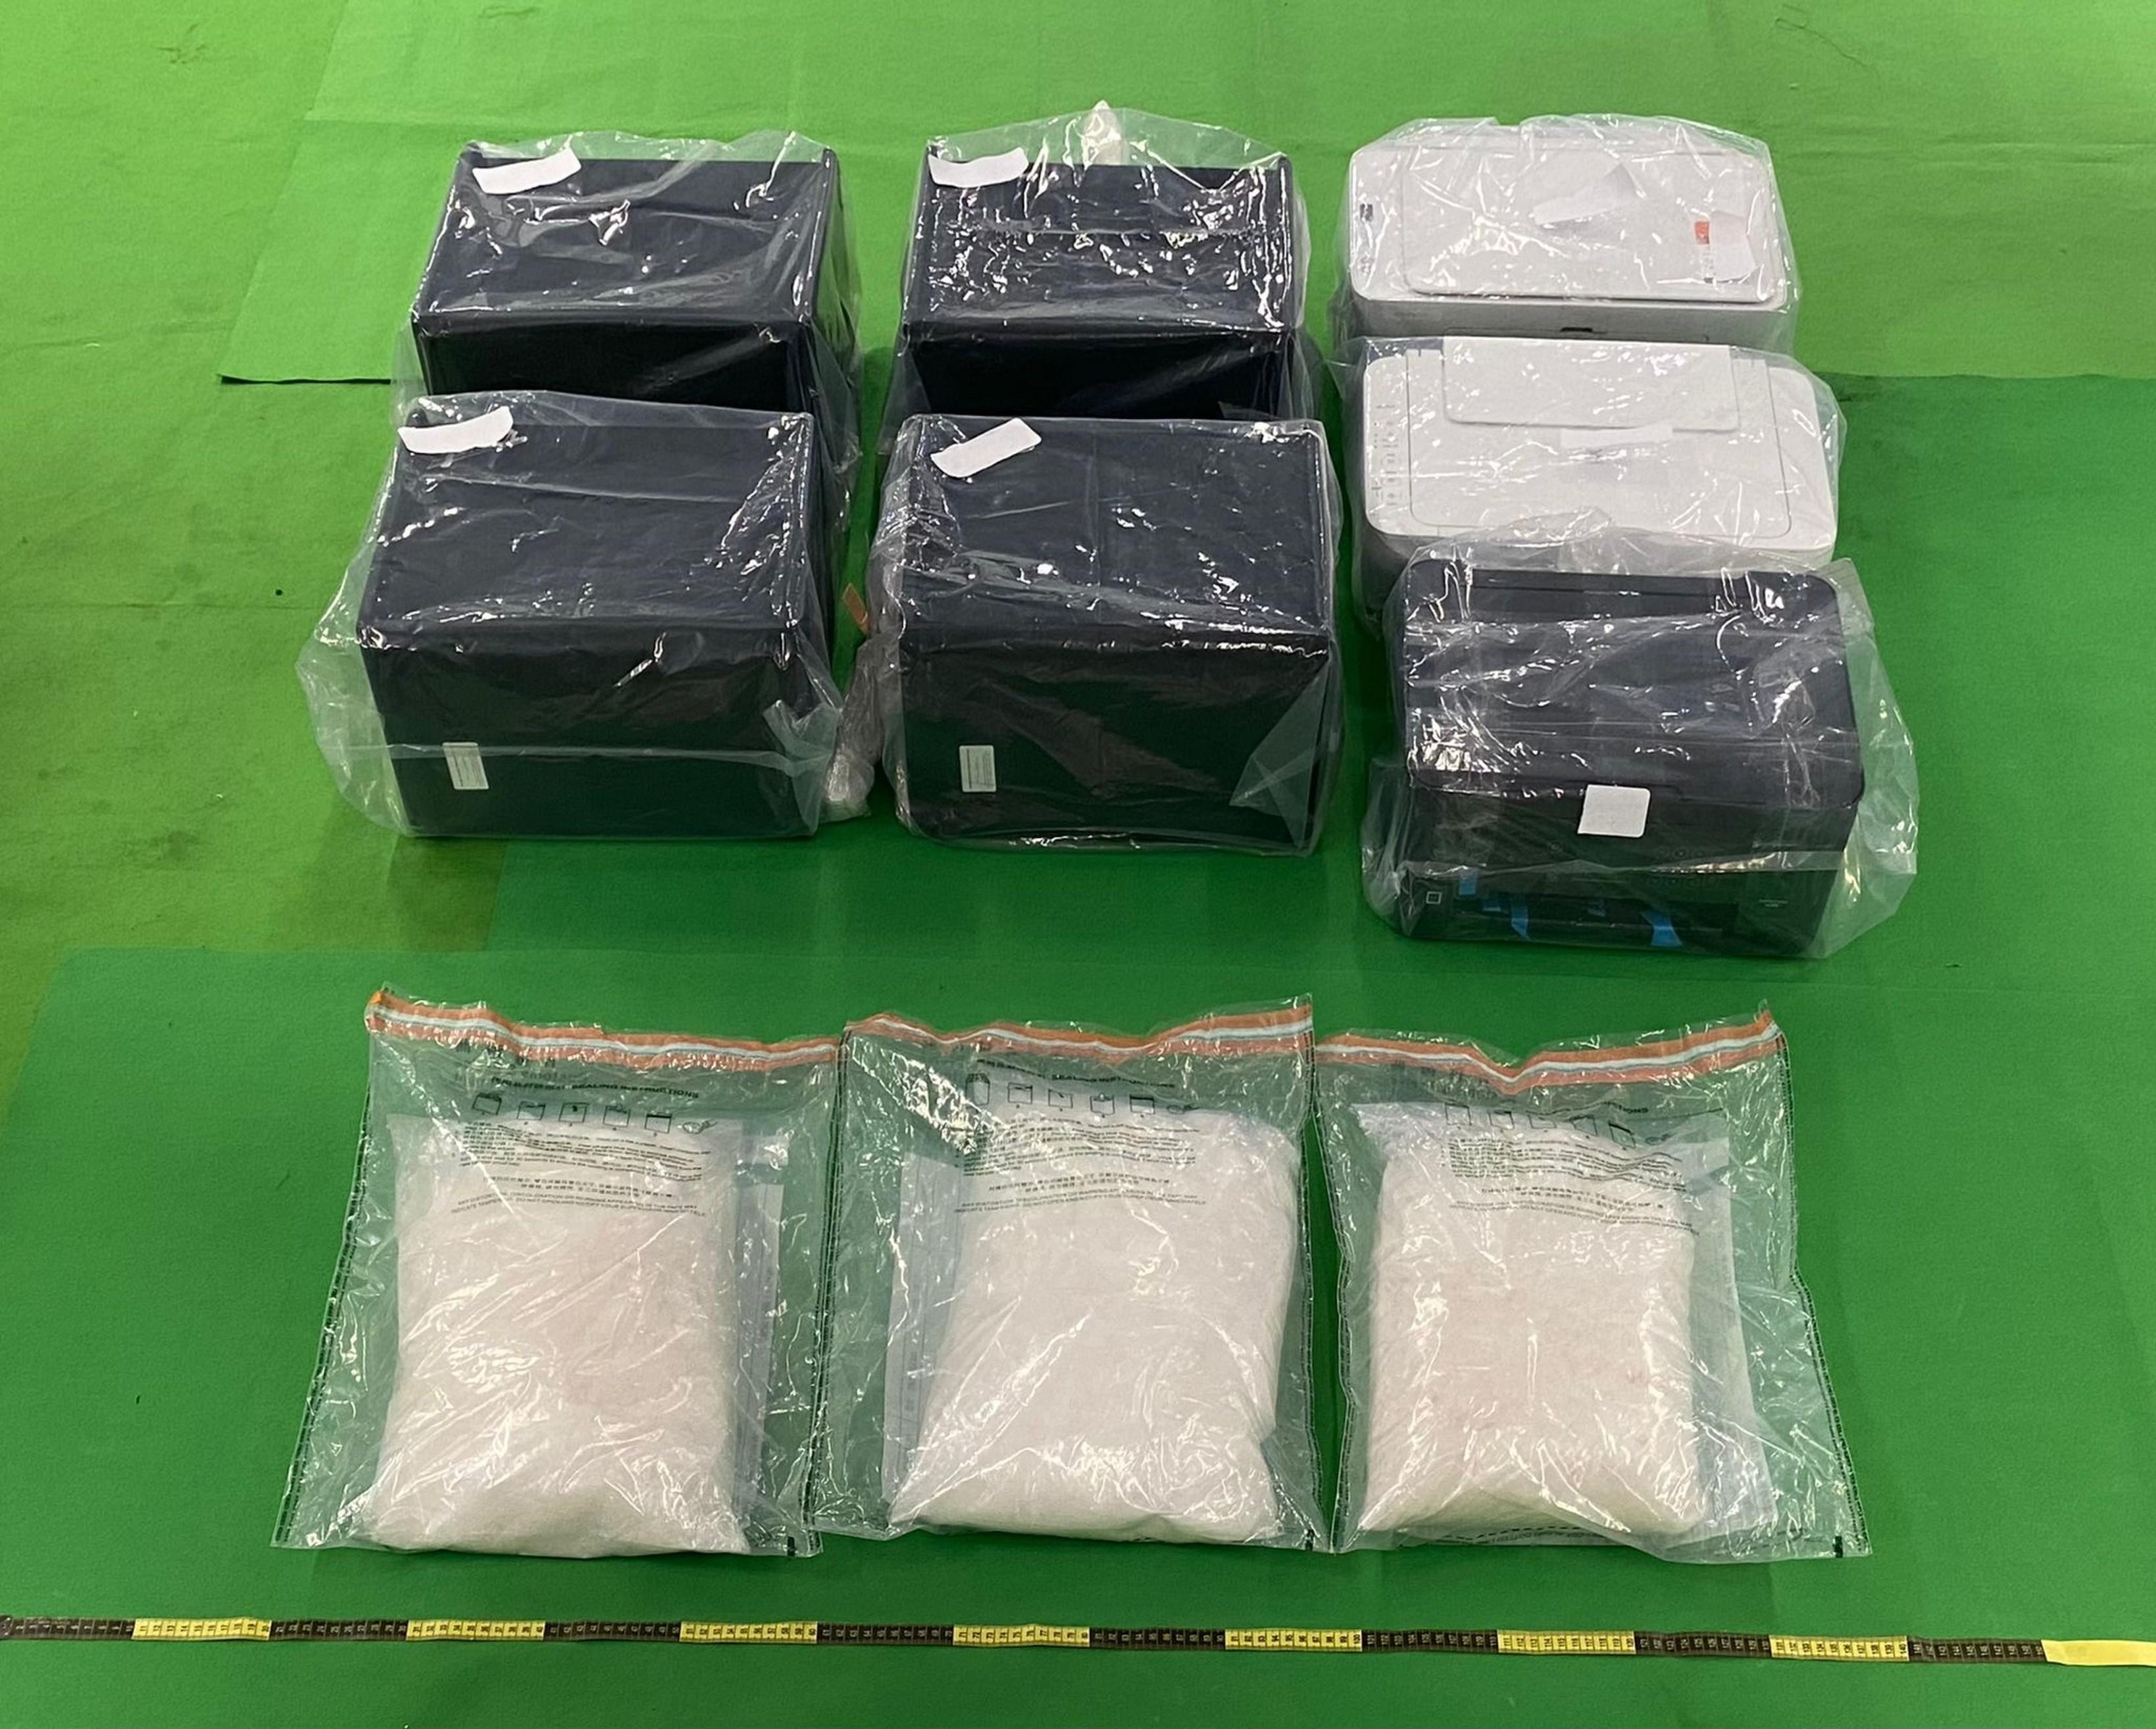 Hong Kong Customs detected five dangerous drugs cases, in which local freight consolidators were being exploited, at Hong Kong International Airport between end-July and mid-October this year and seized about 29 kilograms of suspected methamphetamine and about 12kg of suspected cannabis buds with a total estimated market value of about $20 million. Photo shows the suspected methamphetamine seized by Customs officers in the second and third cases as well as three printers and four speakers used to conceal the drugs.